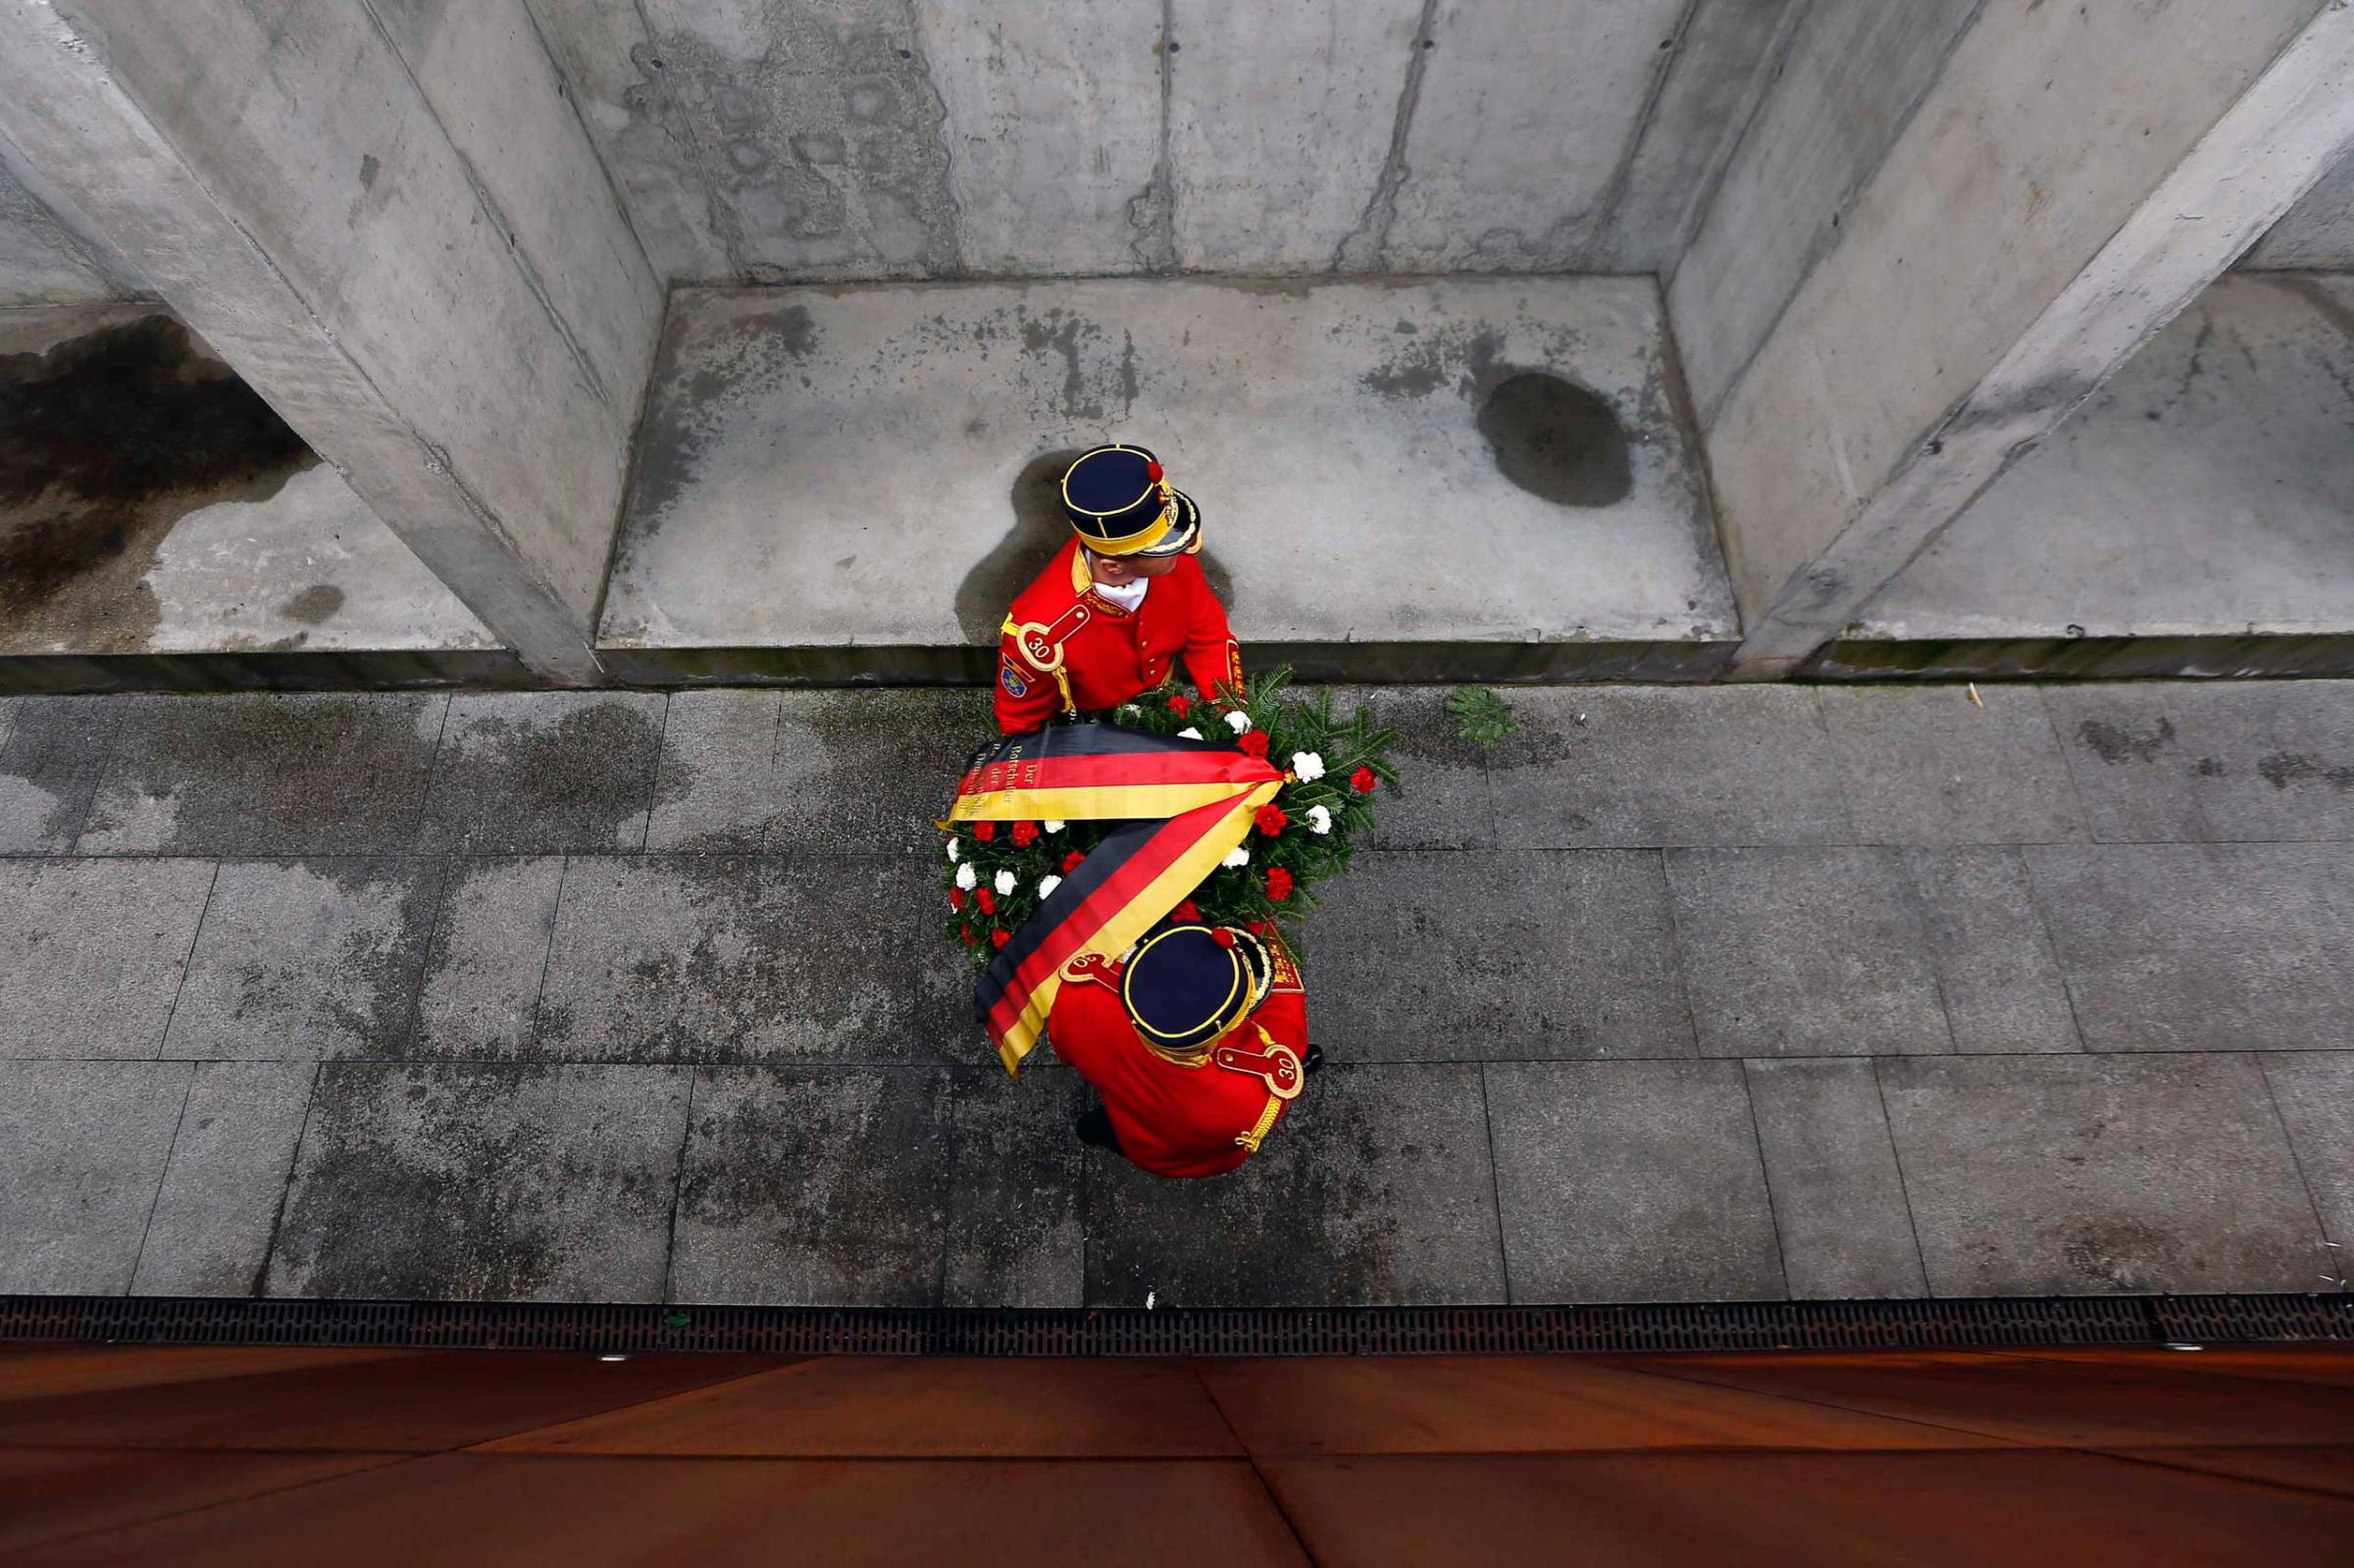 Romanian soldiers carry a wreath during ceremonies at Holocaust memorial in Bucharest